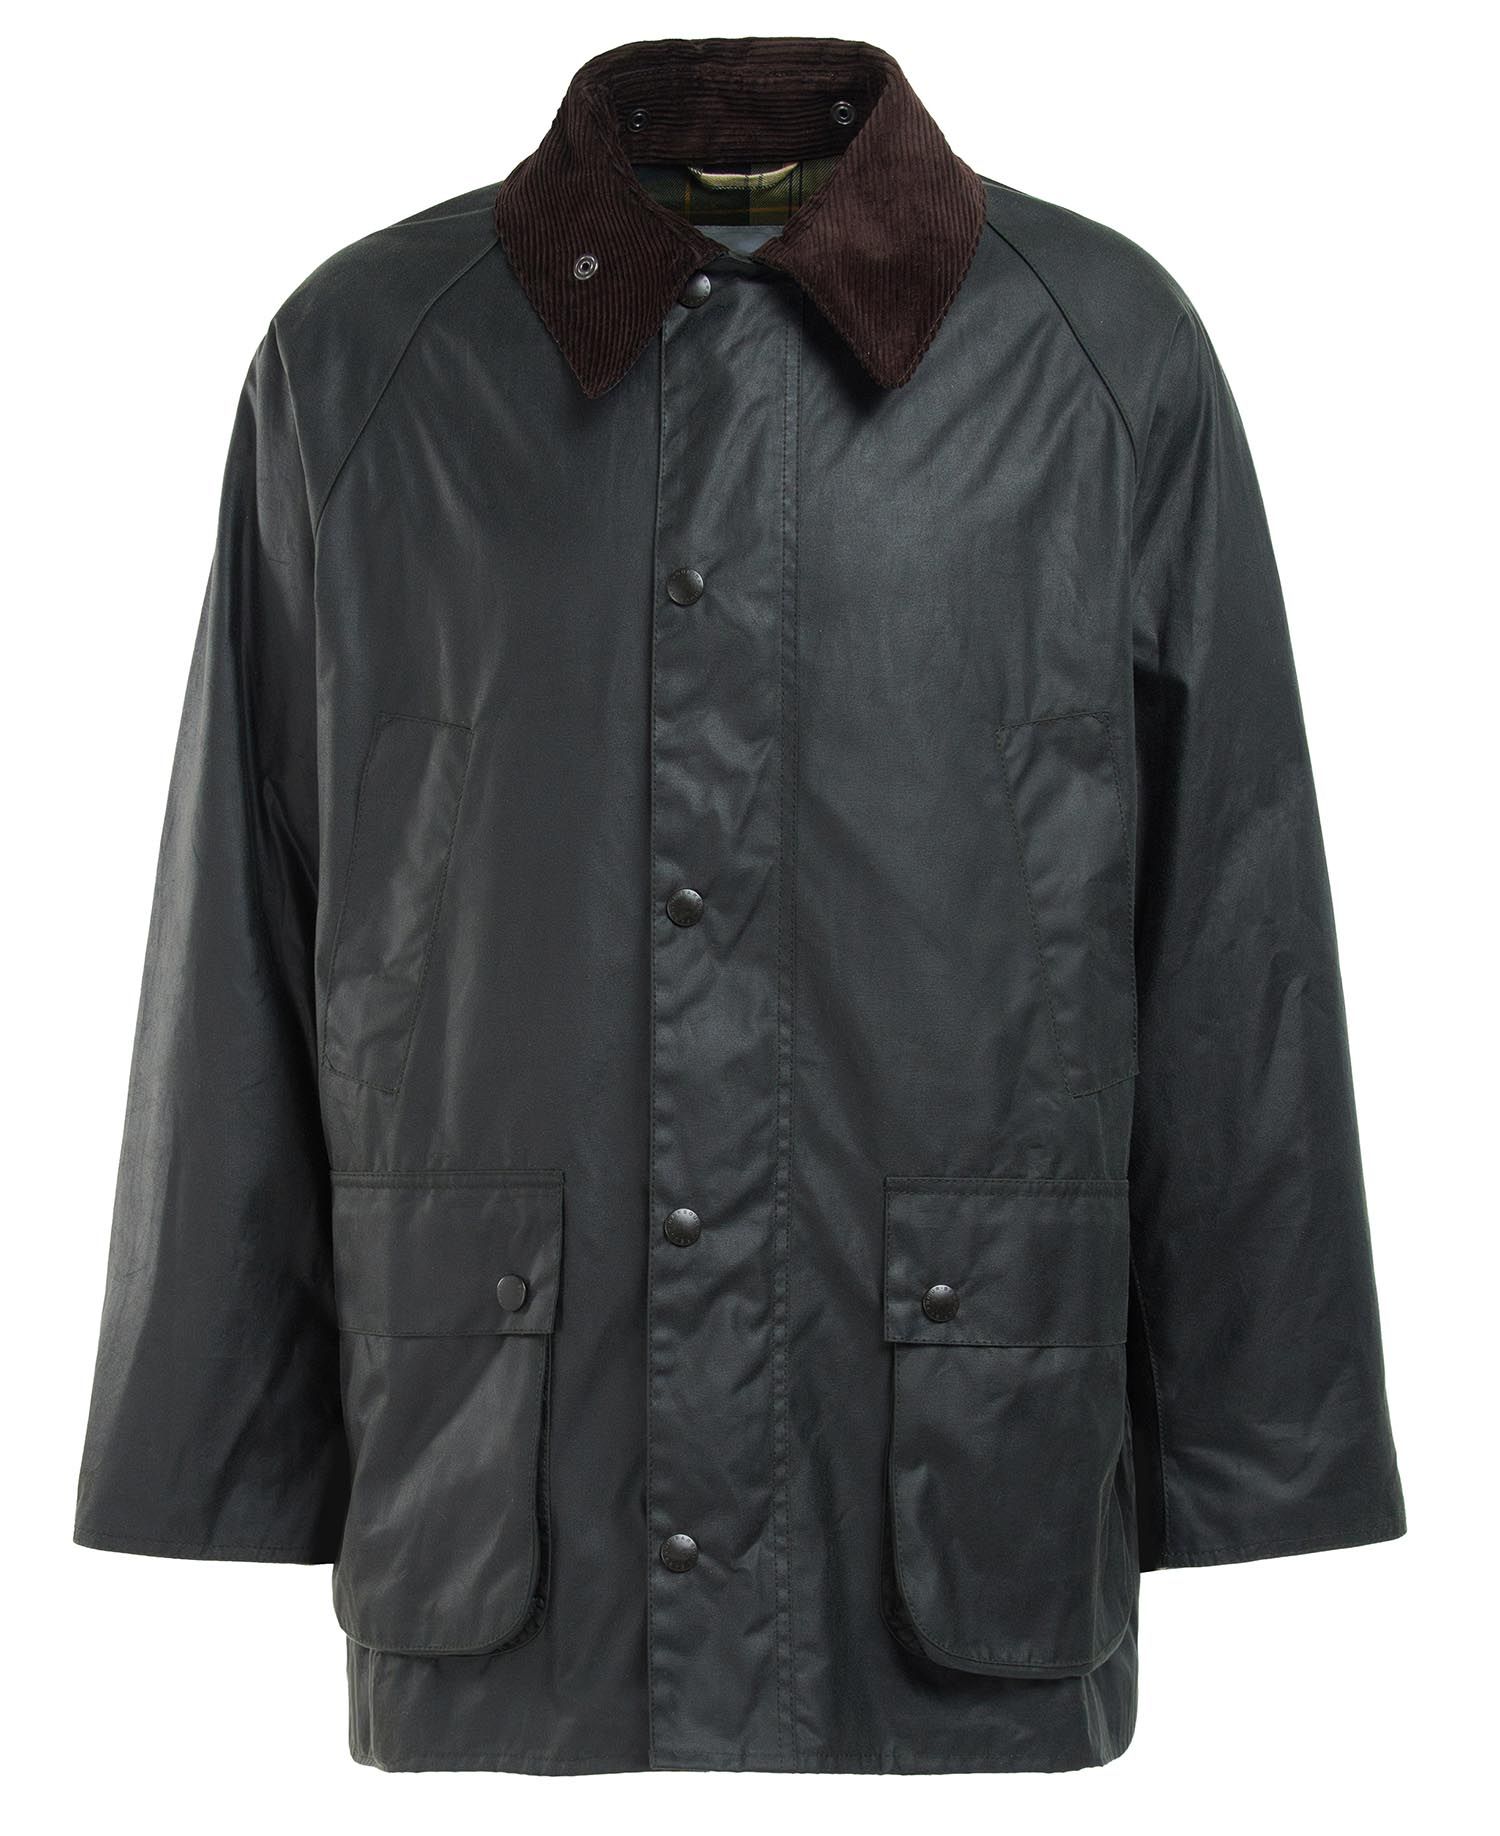 OS Bedale Wax Jacket